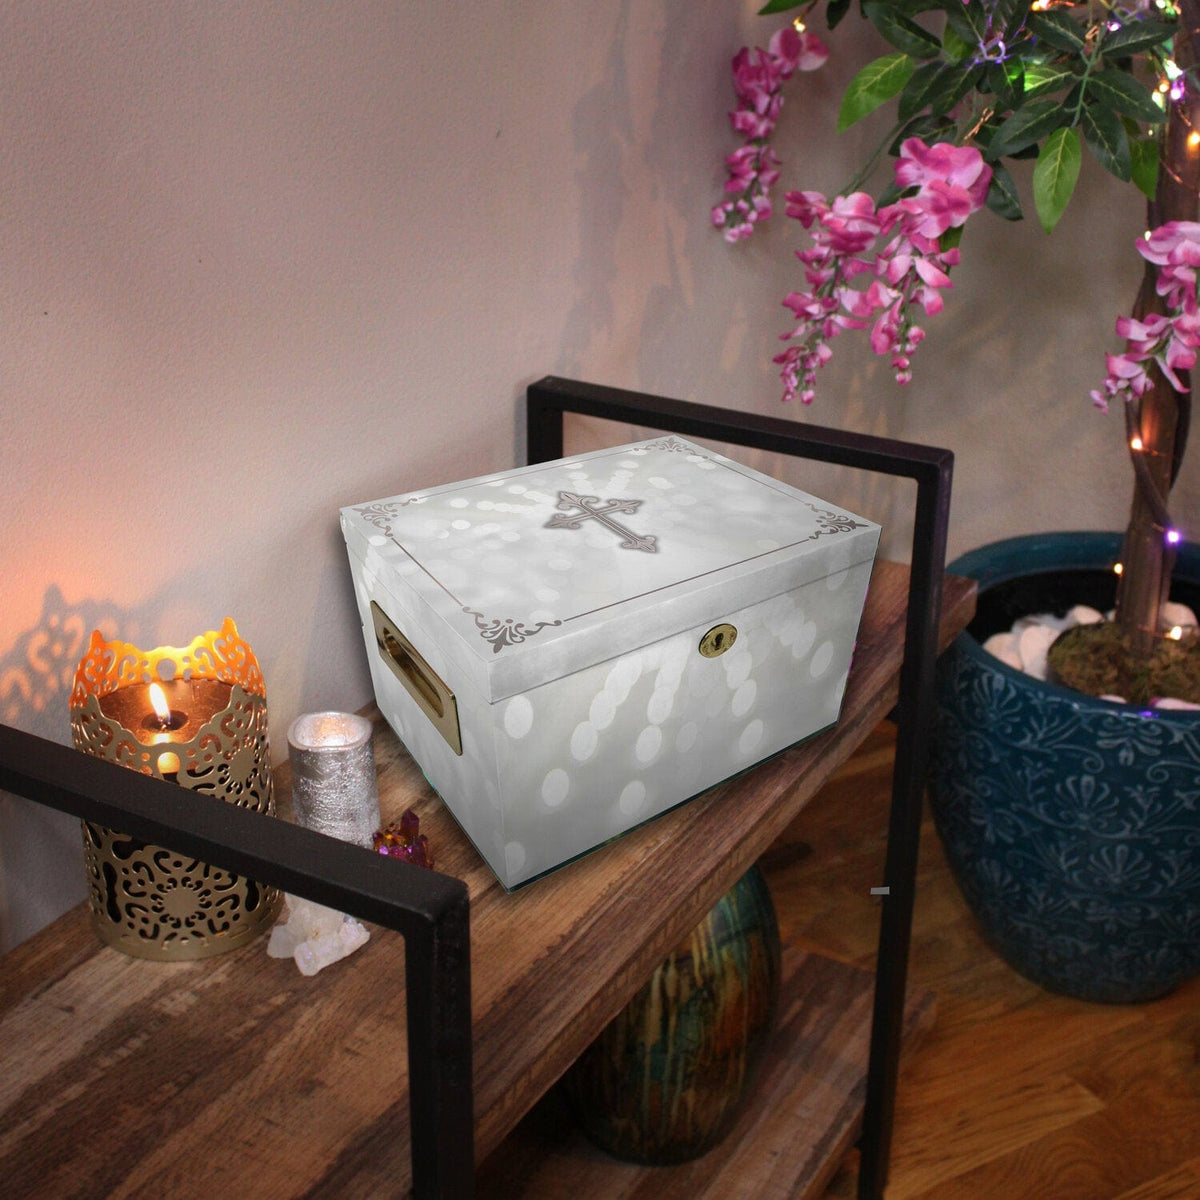 Commemorative Cremation Urns Shining His Light (Silver) Memorial Collection Chest Cremation Urn